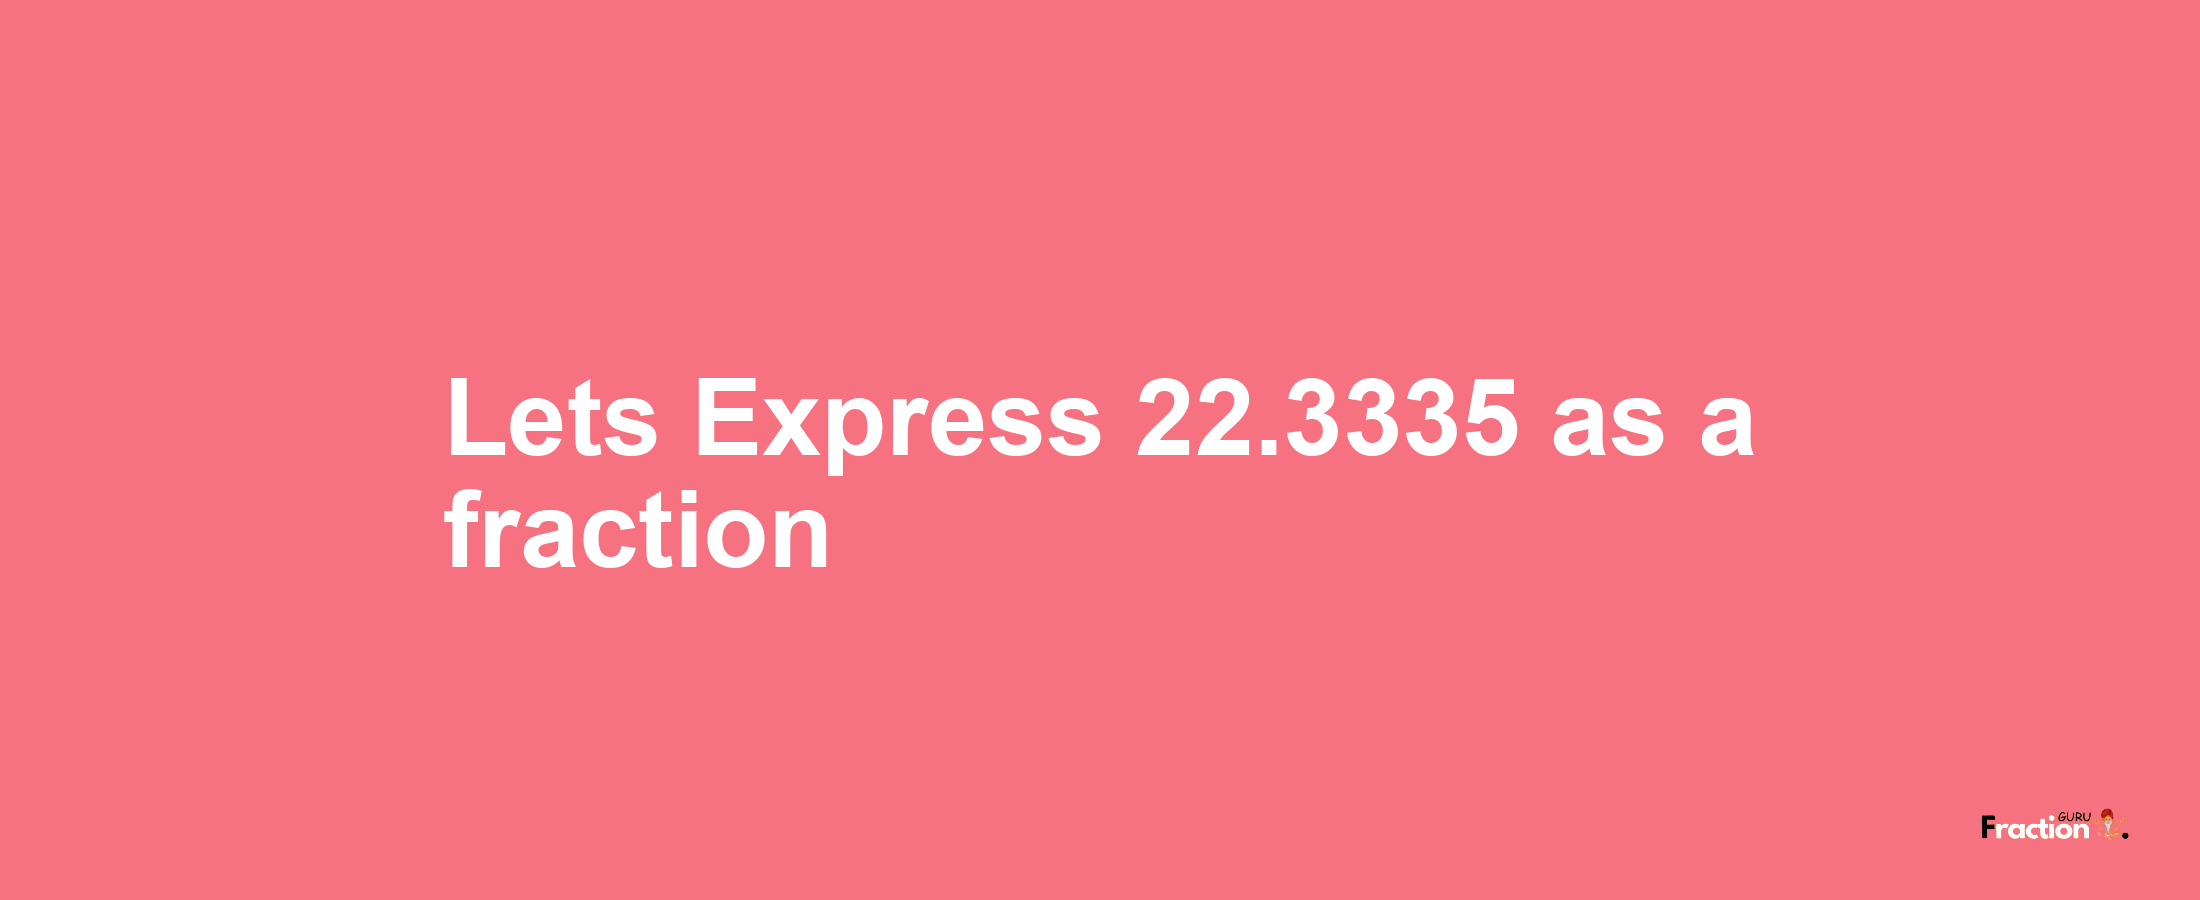 Lets Express 22.3335 as afraction